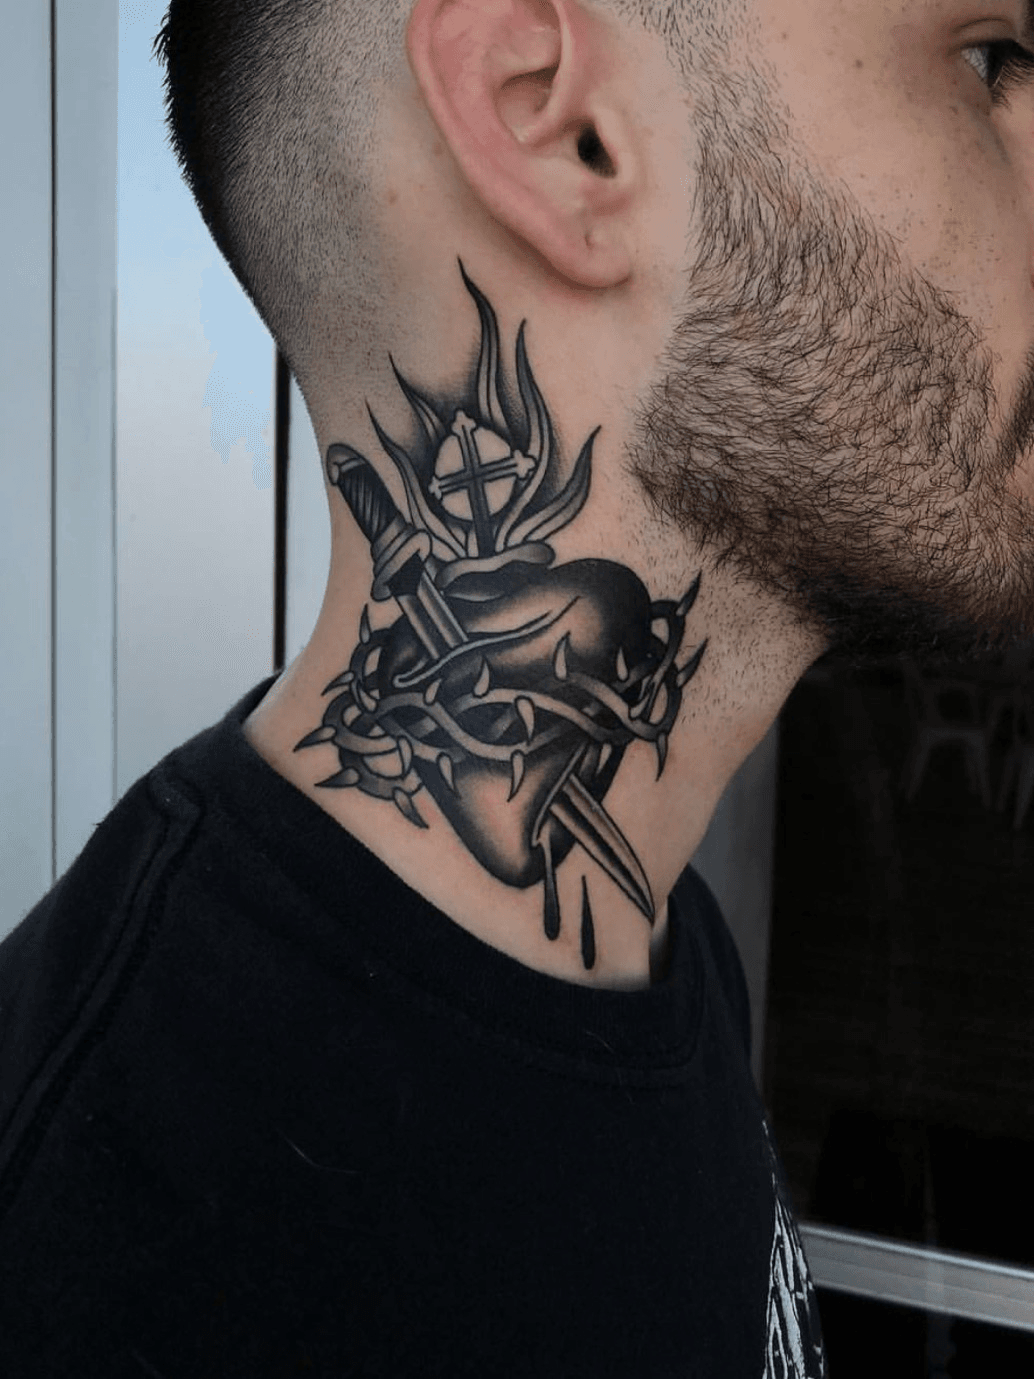 Neck Tattoo by Bryan Vargas inked inkedmag tattoo neck placement  realism portrait religious  Front neck tattoo Neck tattoo Jesus tattoo